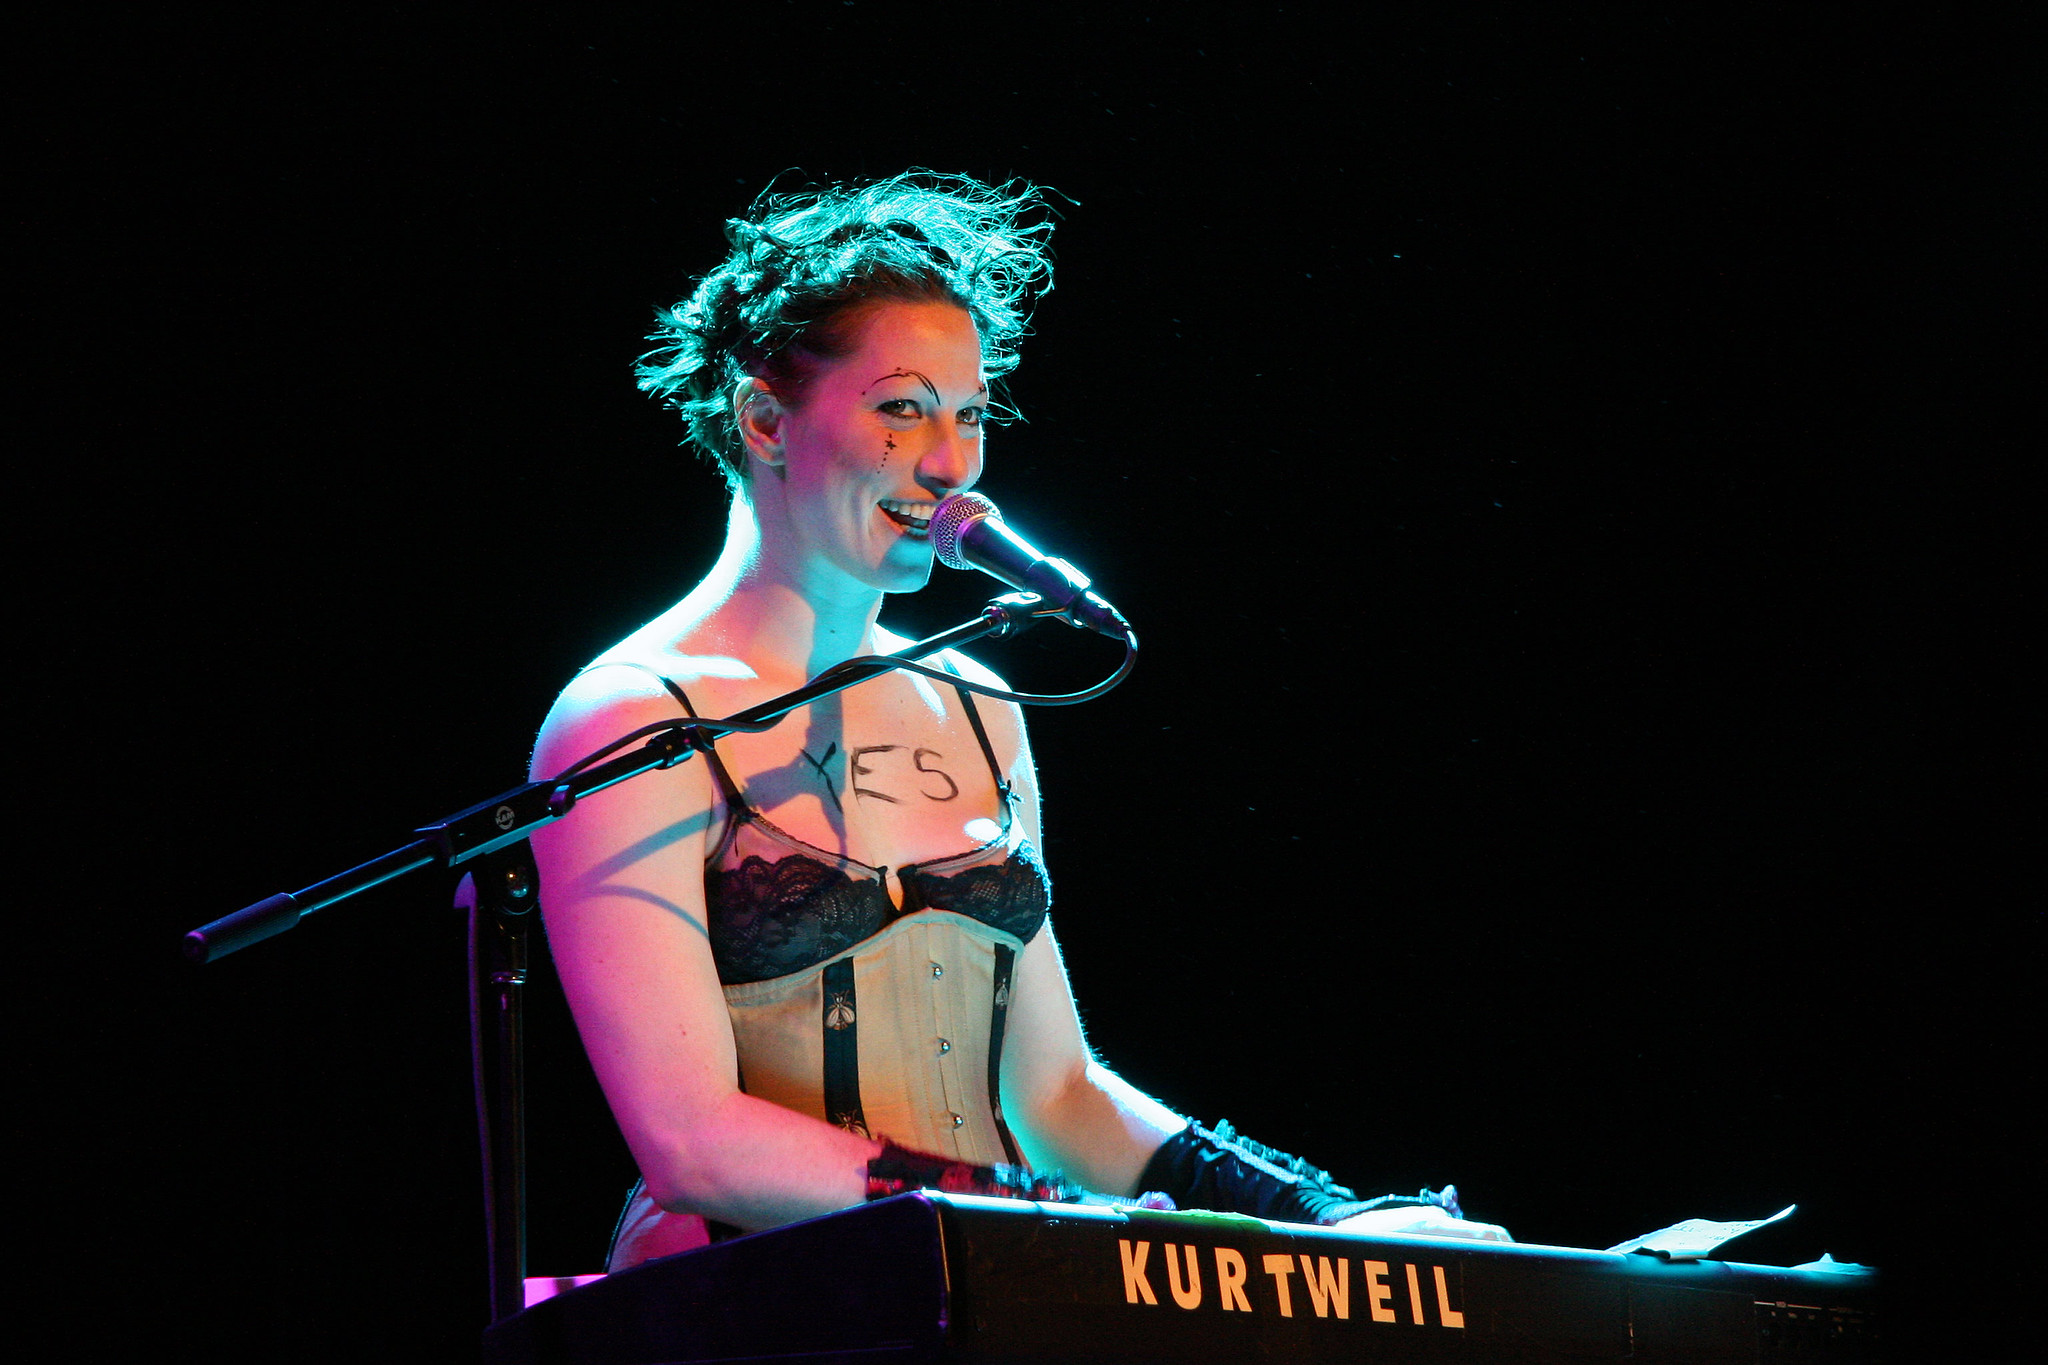 Politically conscious art as backlash: Amanda Palmer’s “There Will Be No Intermission”